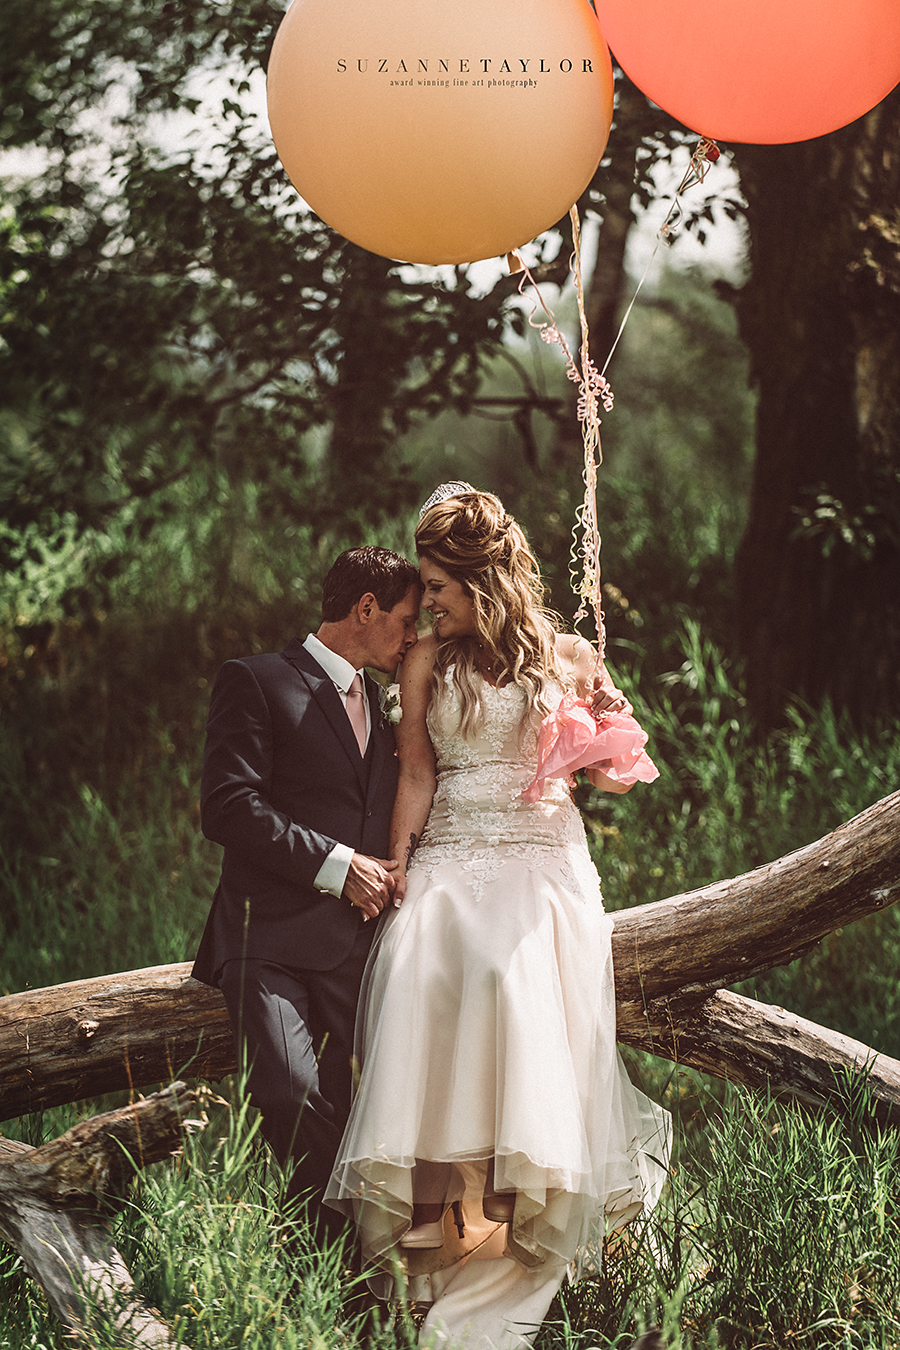 A newly married couple sits on a fallen tree together while the groom kisses her shoulder holding balloons during their Calgary Wedding.